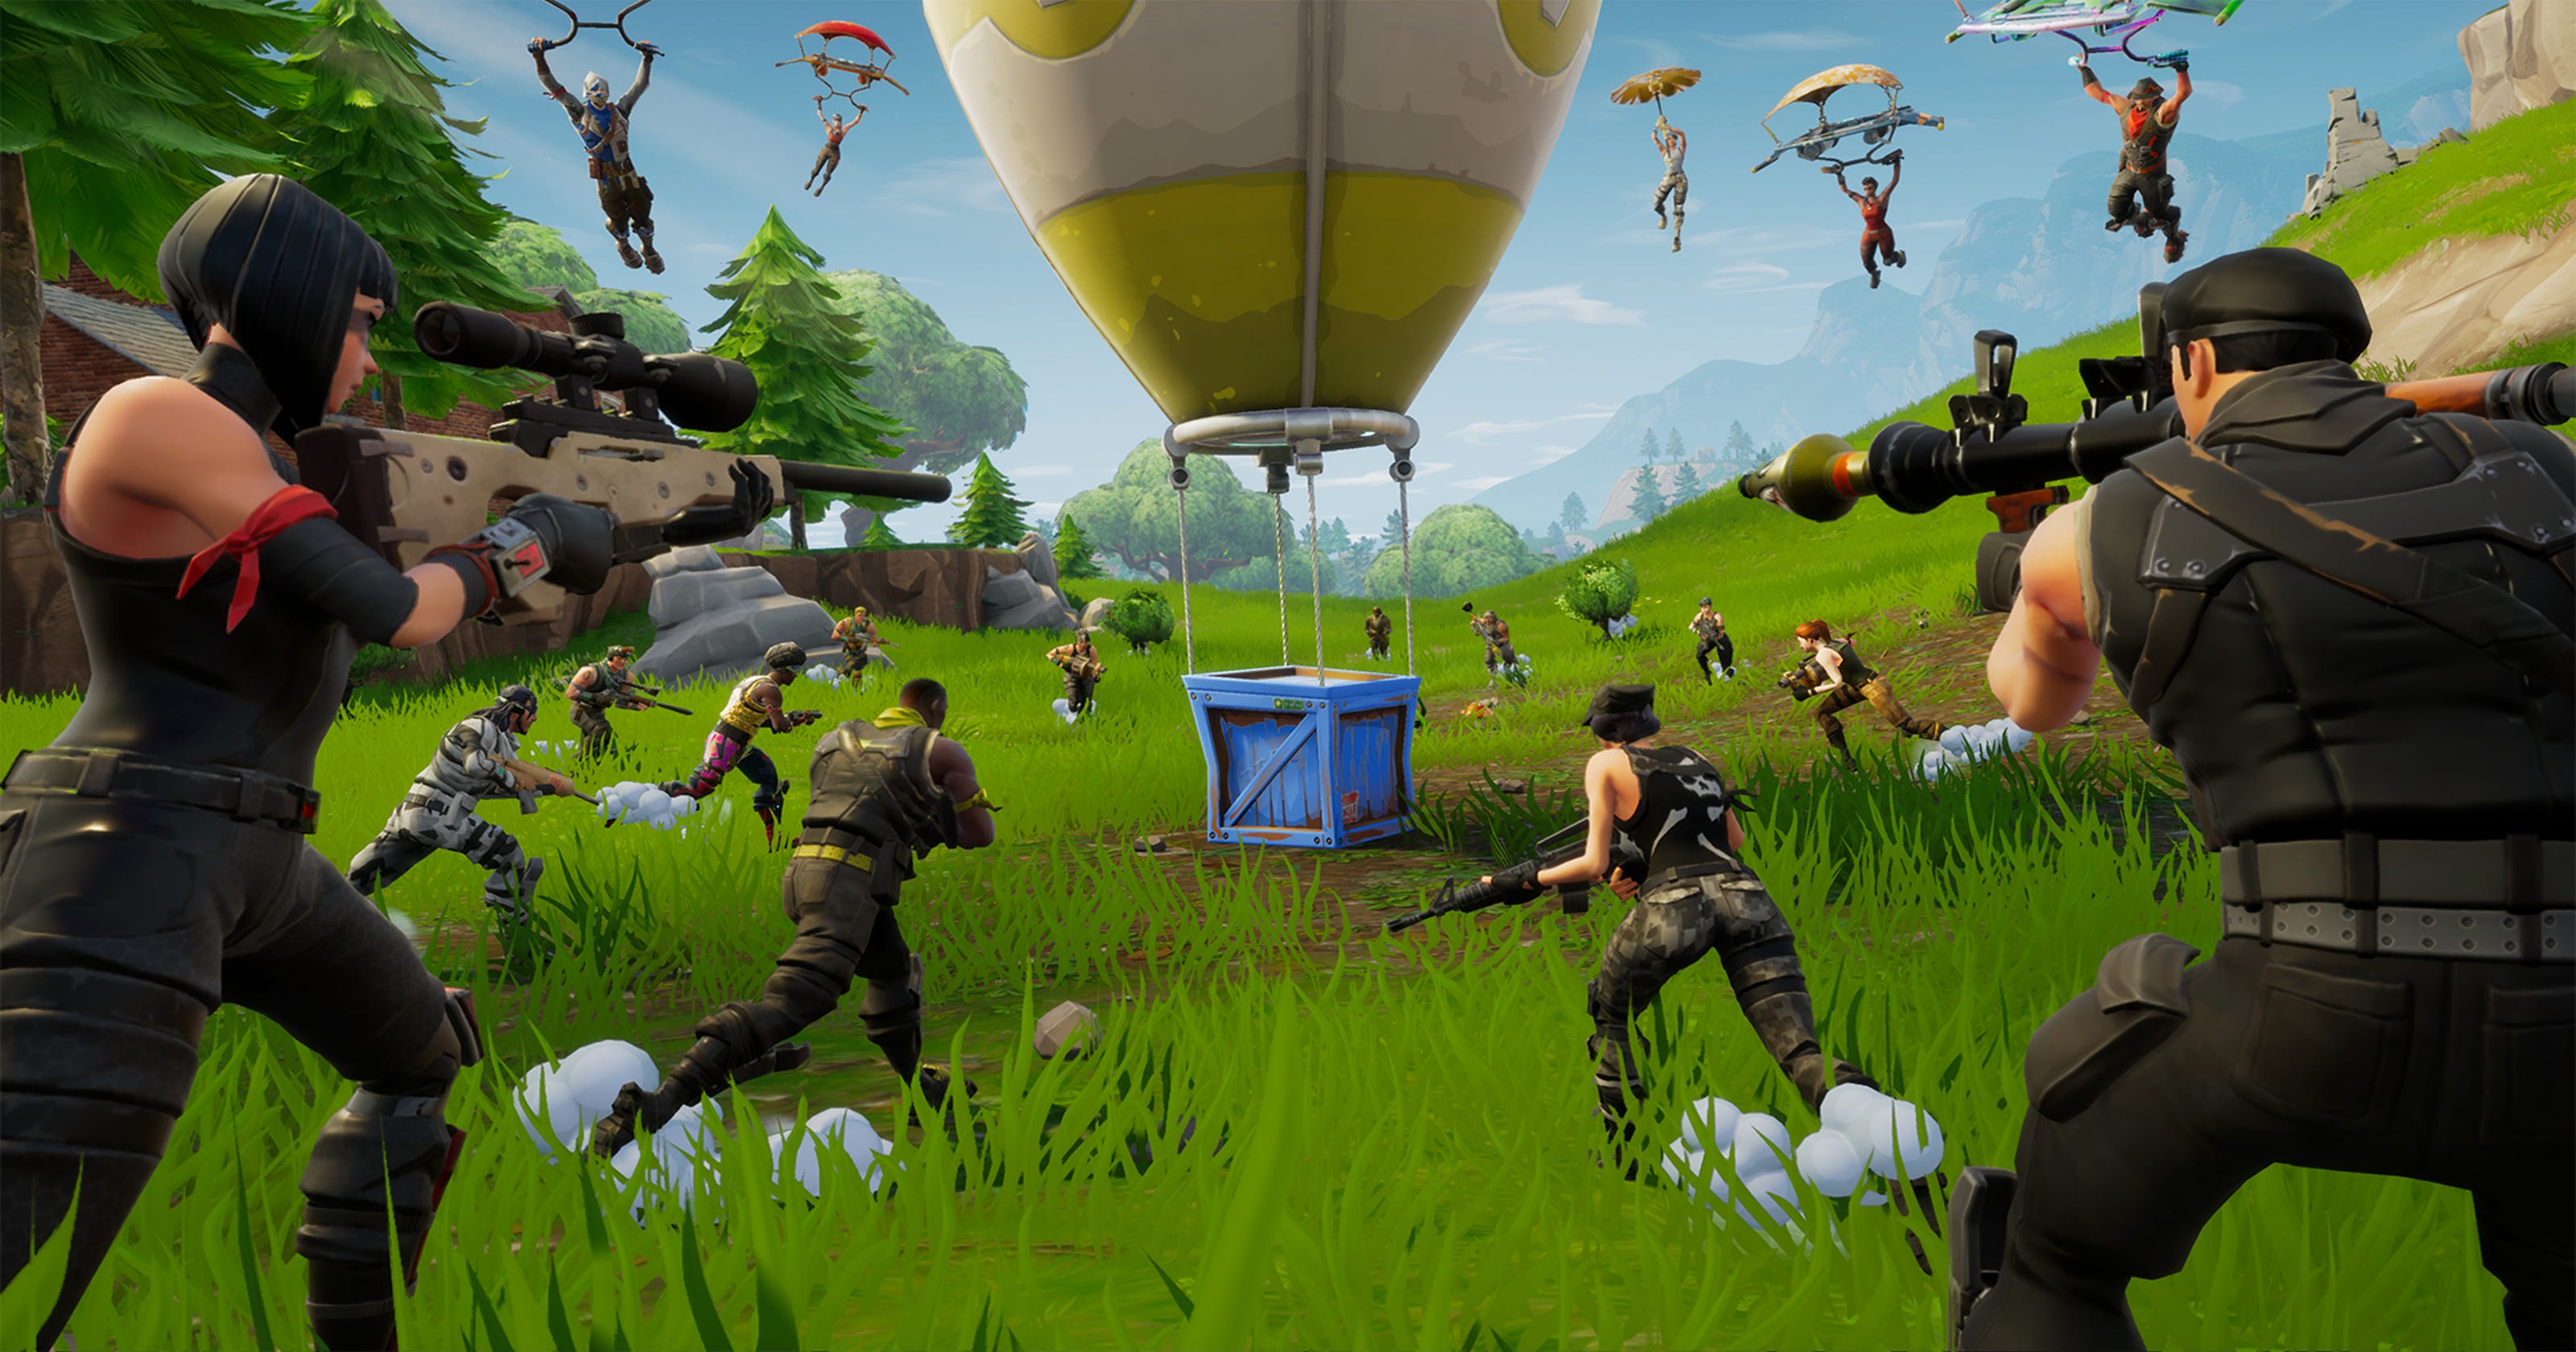 Is Fortnite Save The World Going To Be Free In 2019